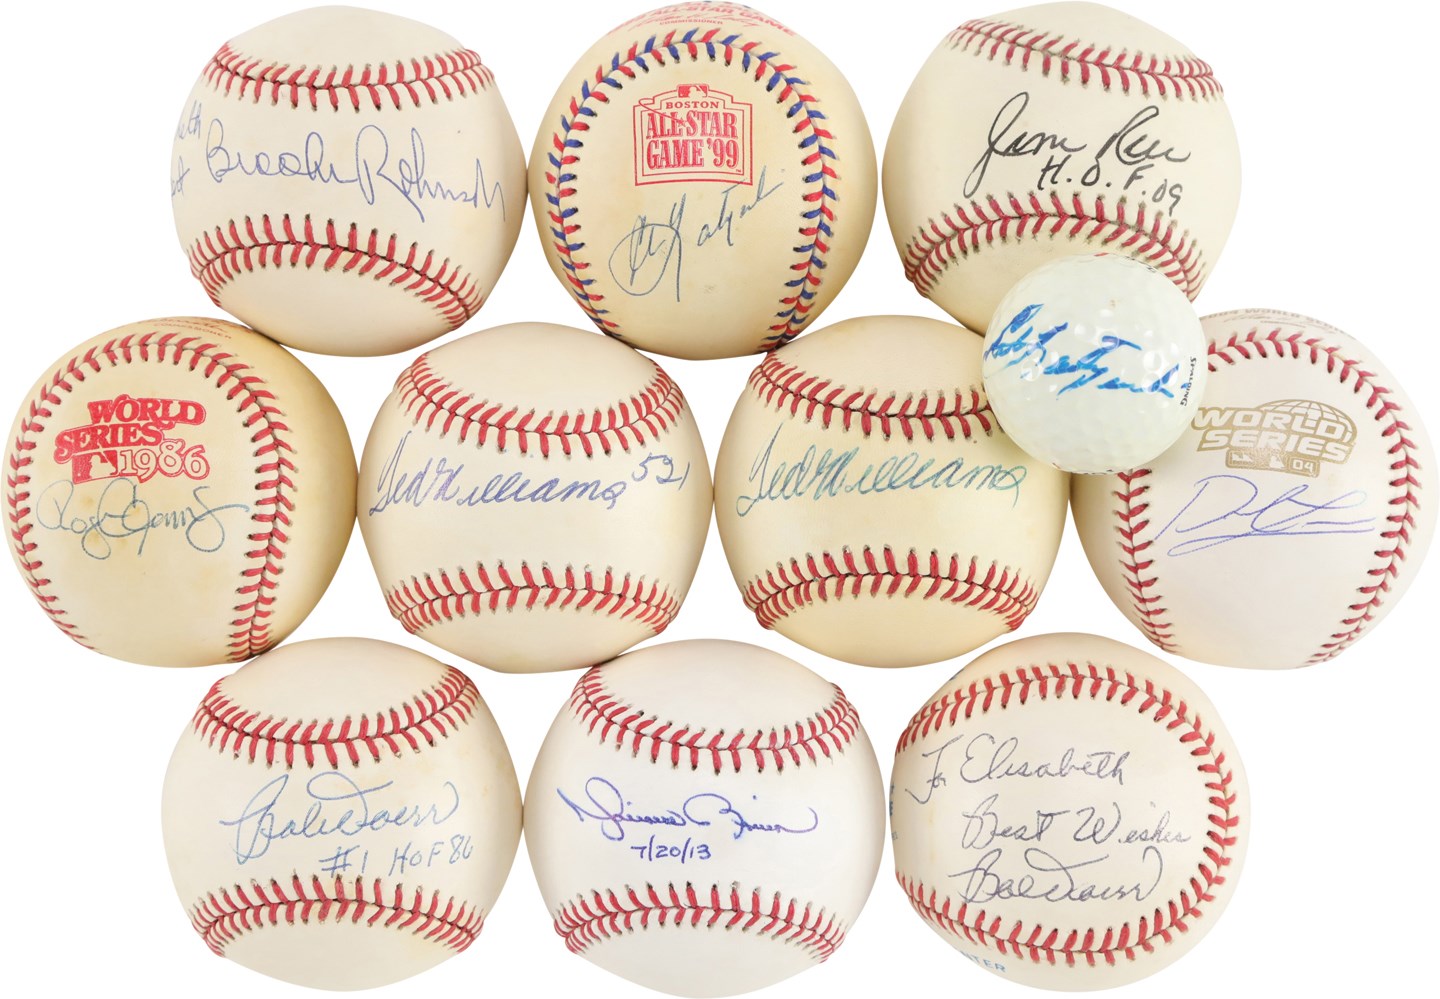 Baseball Autographs - Single-Signed Baseballs and Golf Ball (11) including Two Ted Williams